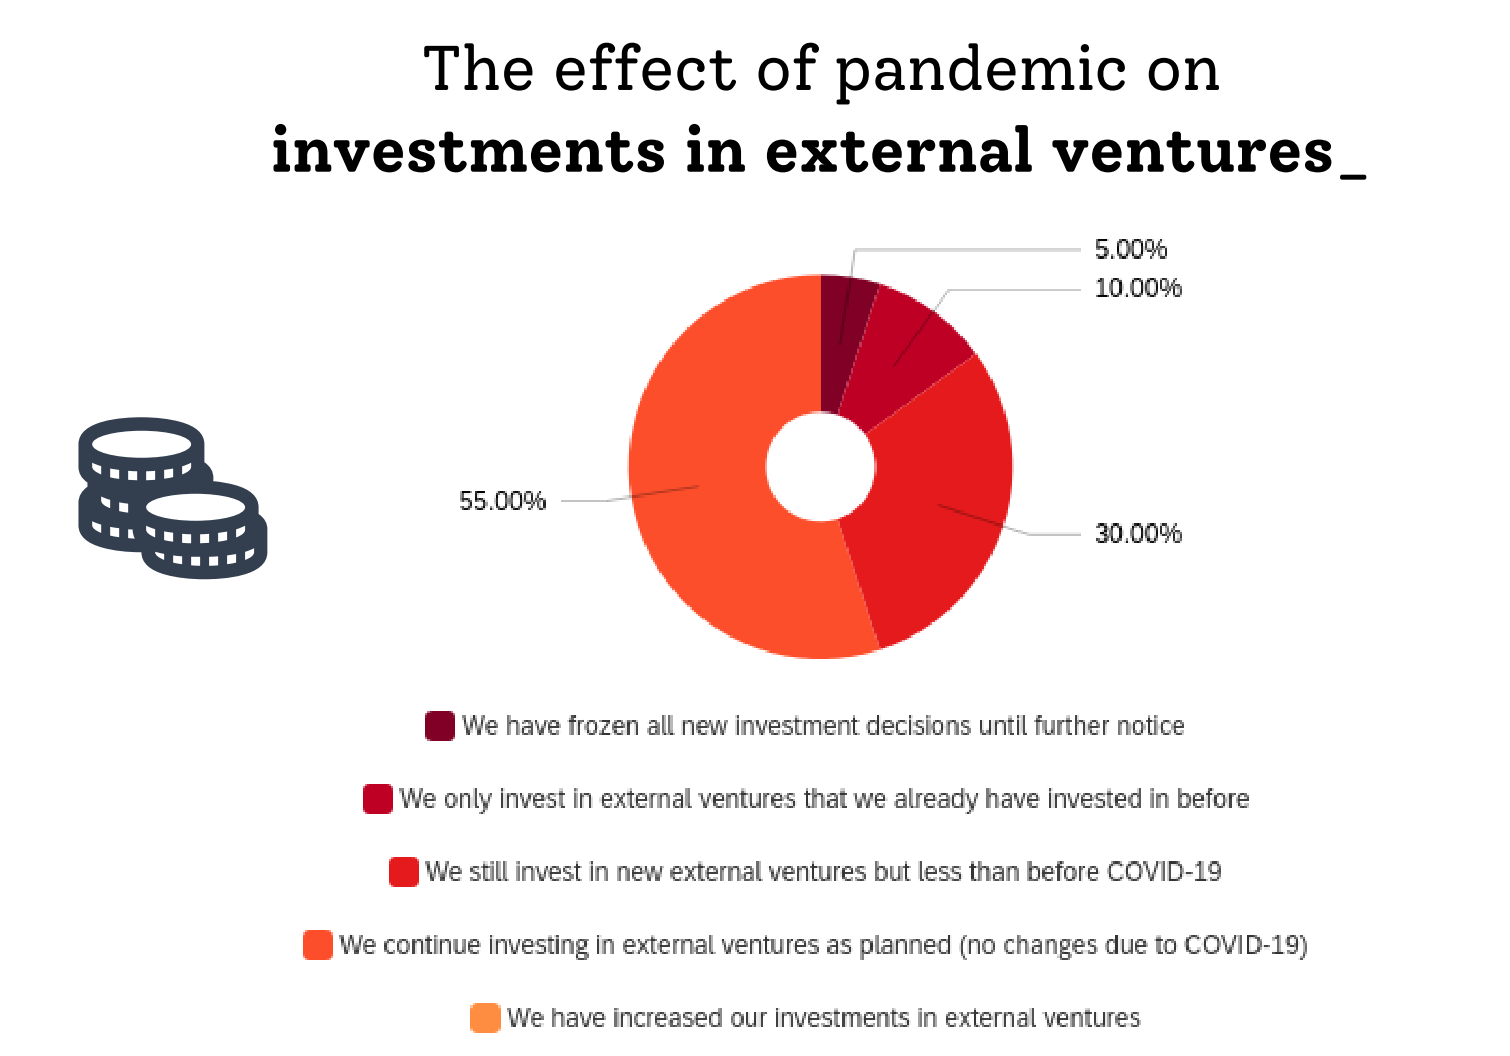 Chart showing the effect of the pandemic on external ventures 